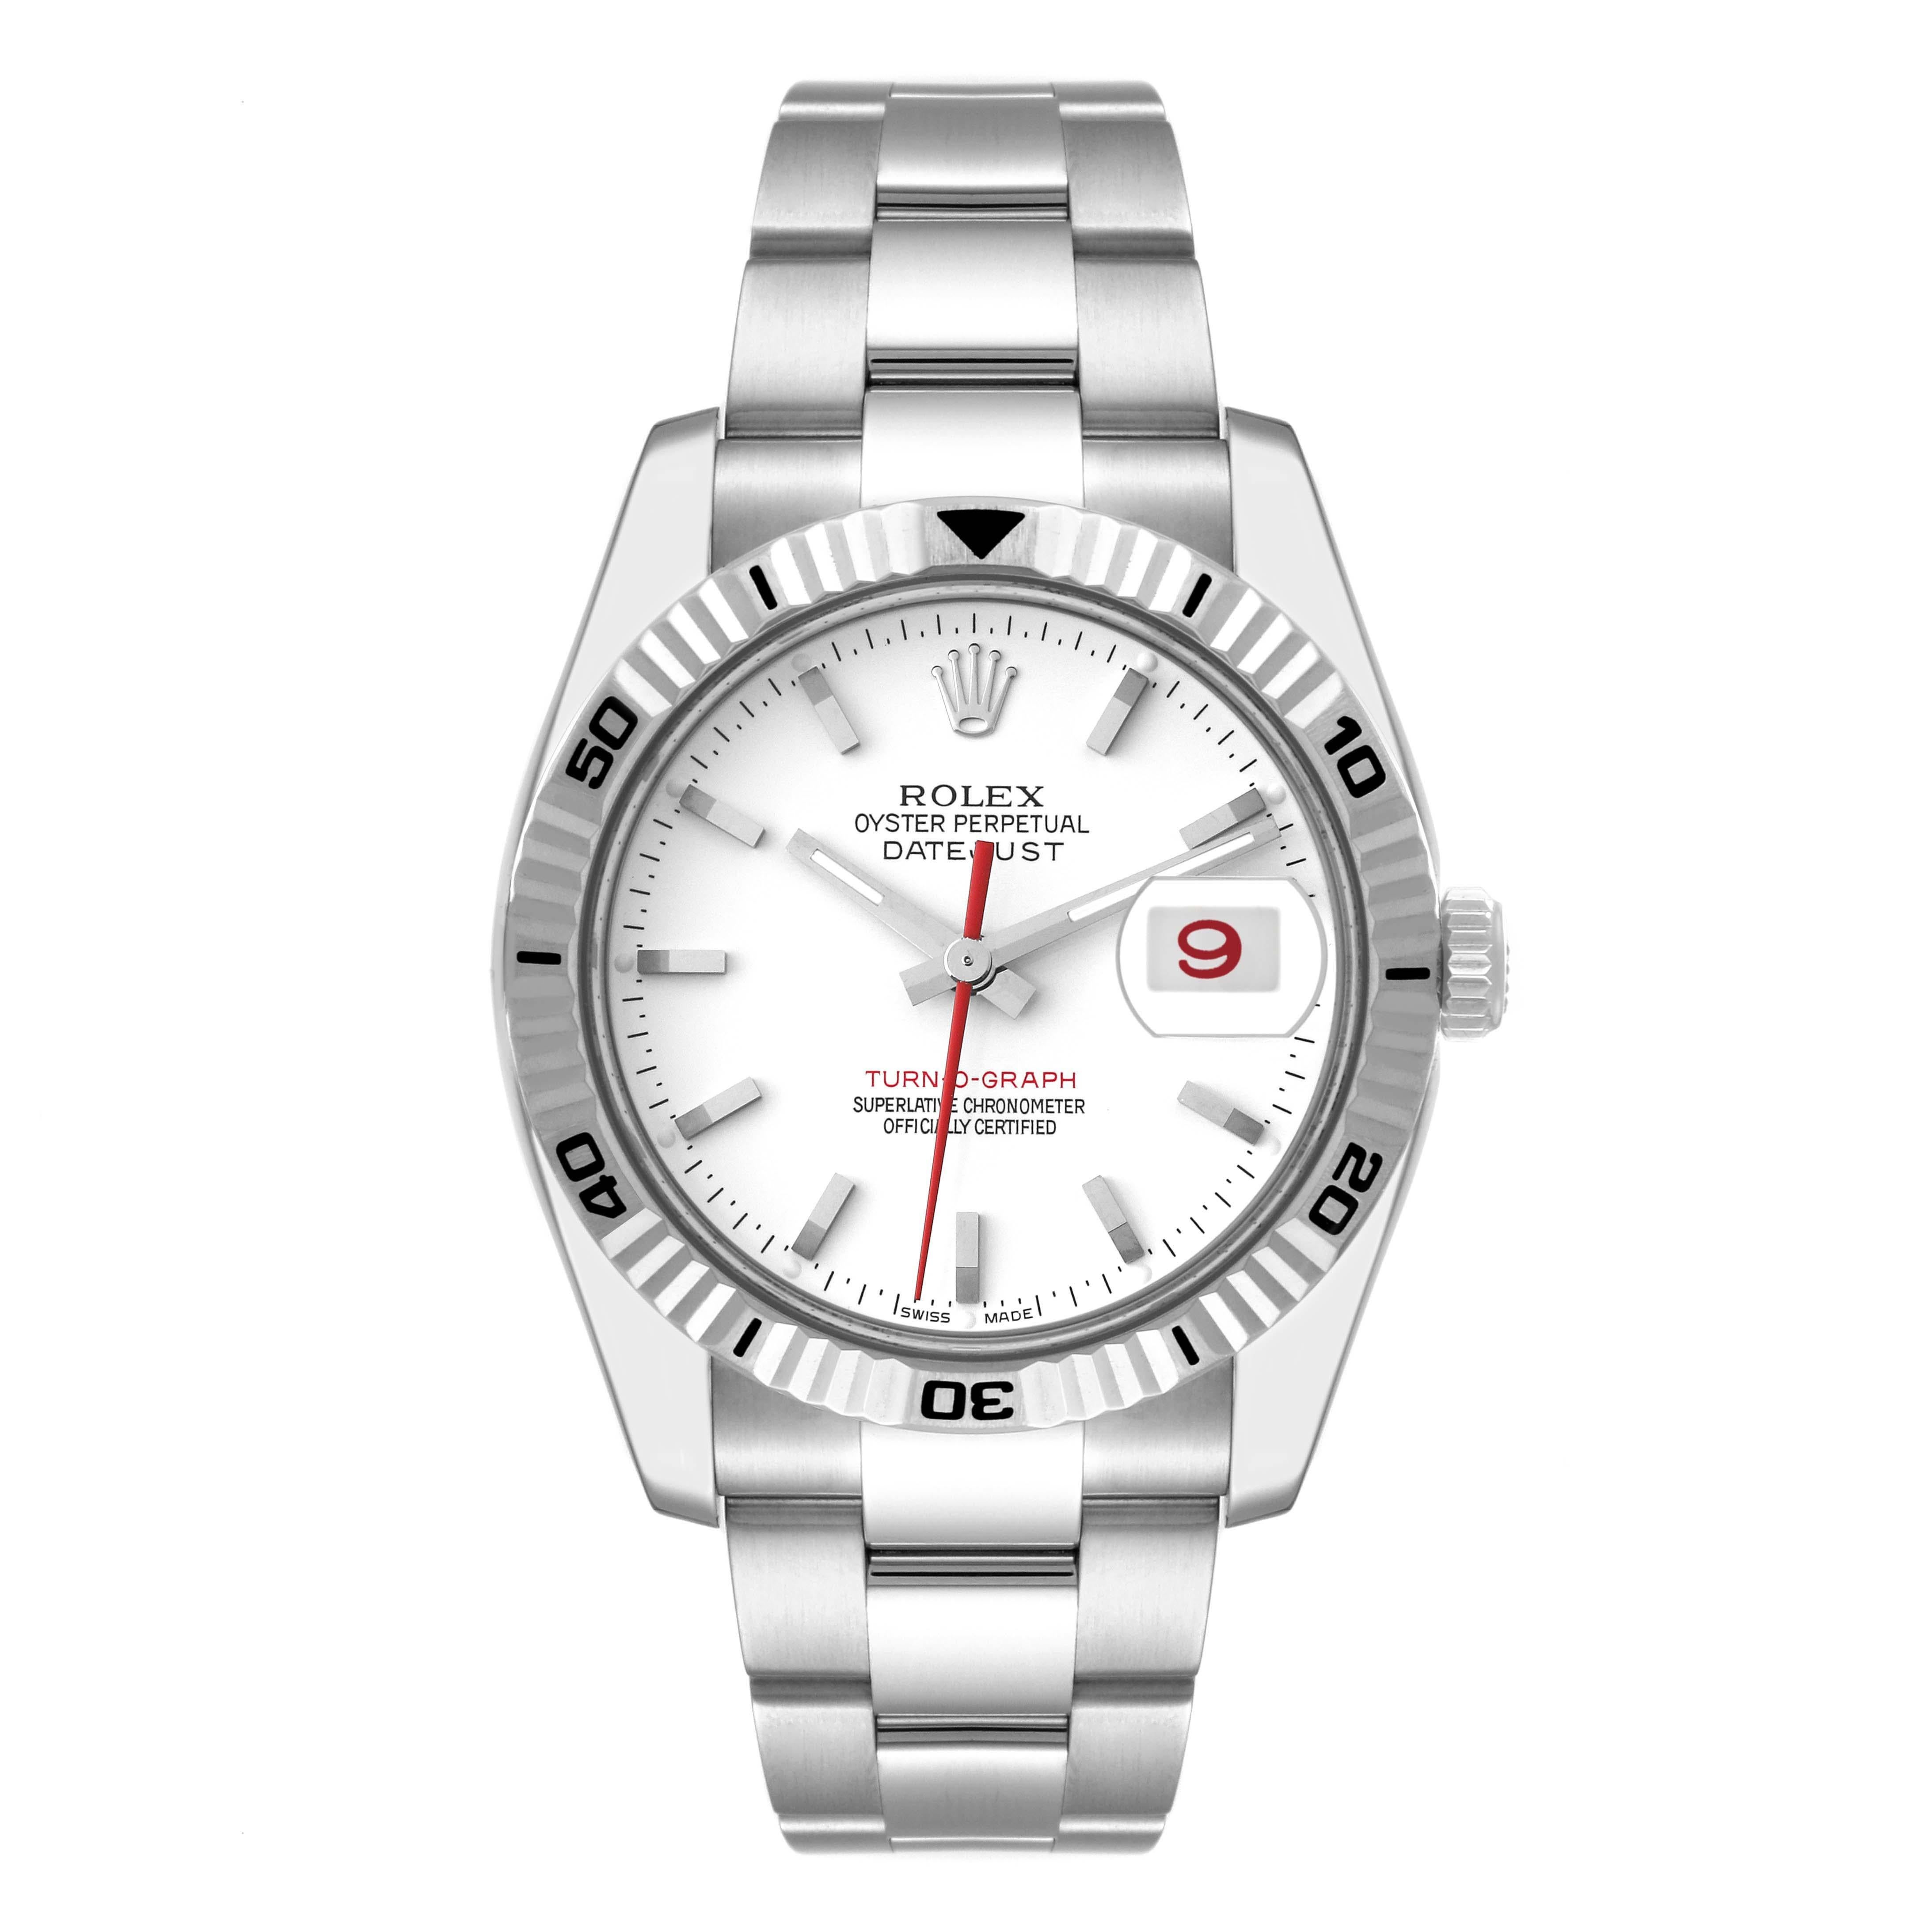 Rolex Datejust Turnograph White Dial Steel Mens Watch 116264 Box Card. Officially certified chronometer self-winding movement. Stainless steel case 36.0 mm in diameter. Rolex logo on the crown. 18k white gold fluted bidirectional rotating turnograph